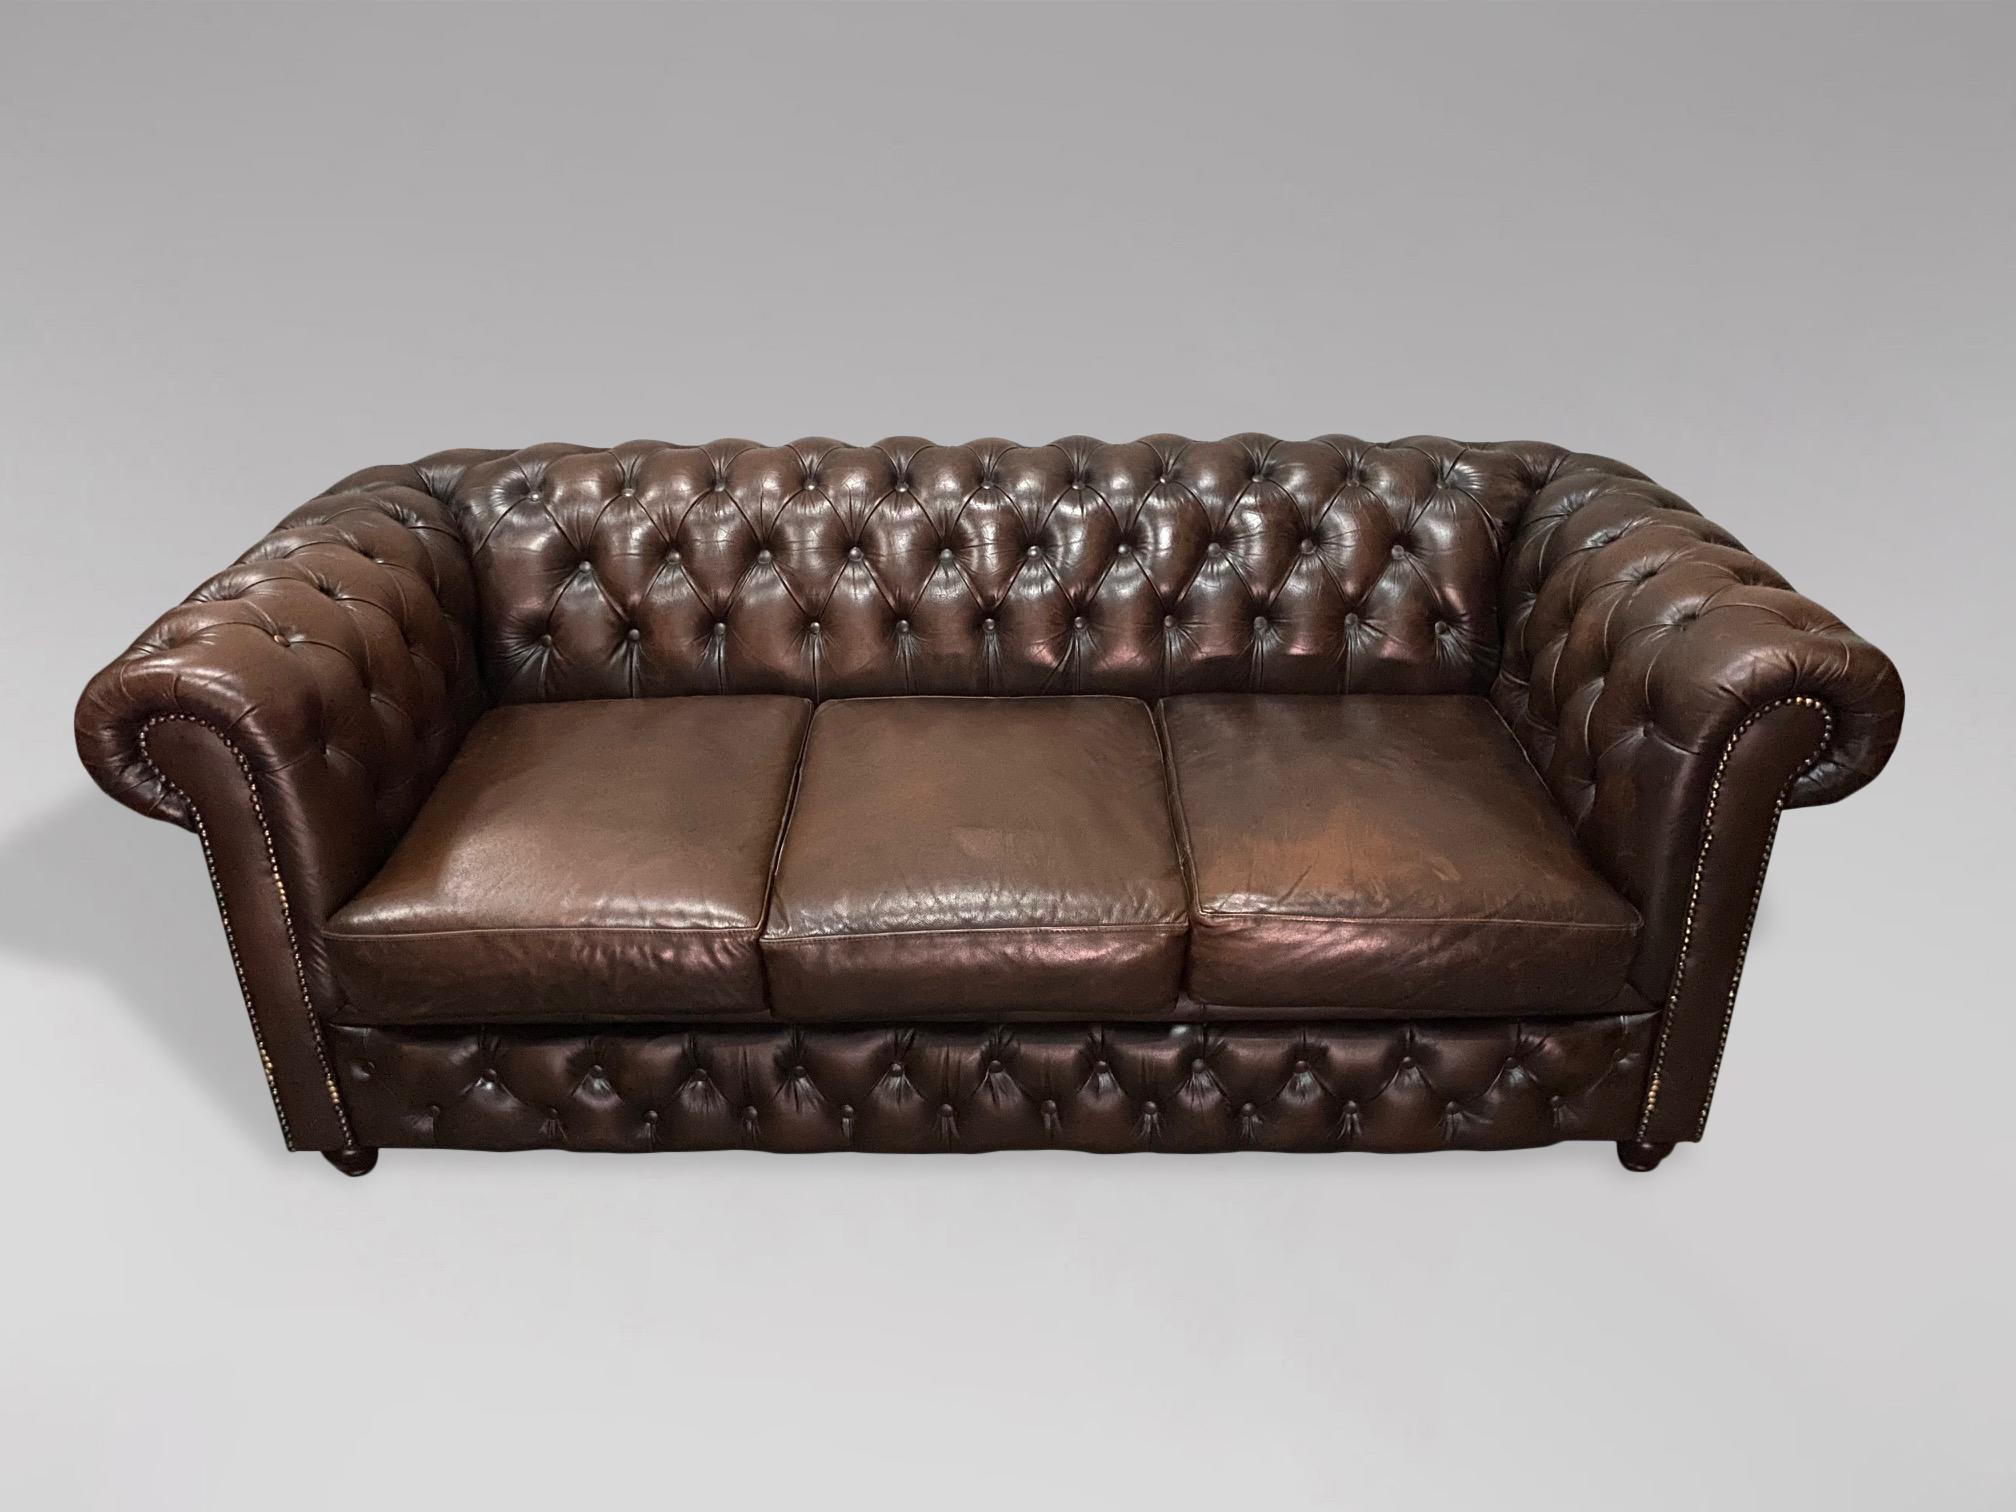 British 20th Century Vintage Brown Leather Three Seater Chesterfield Sofa